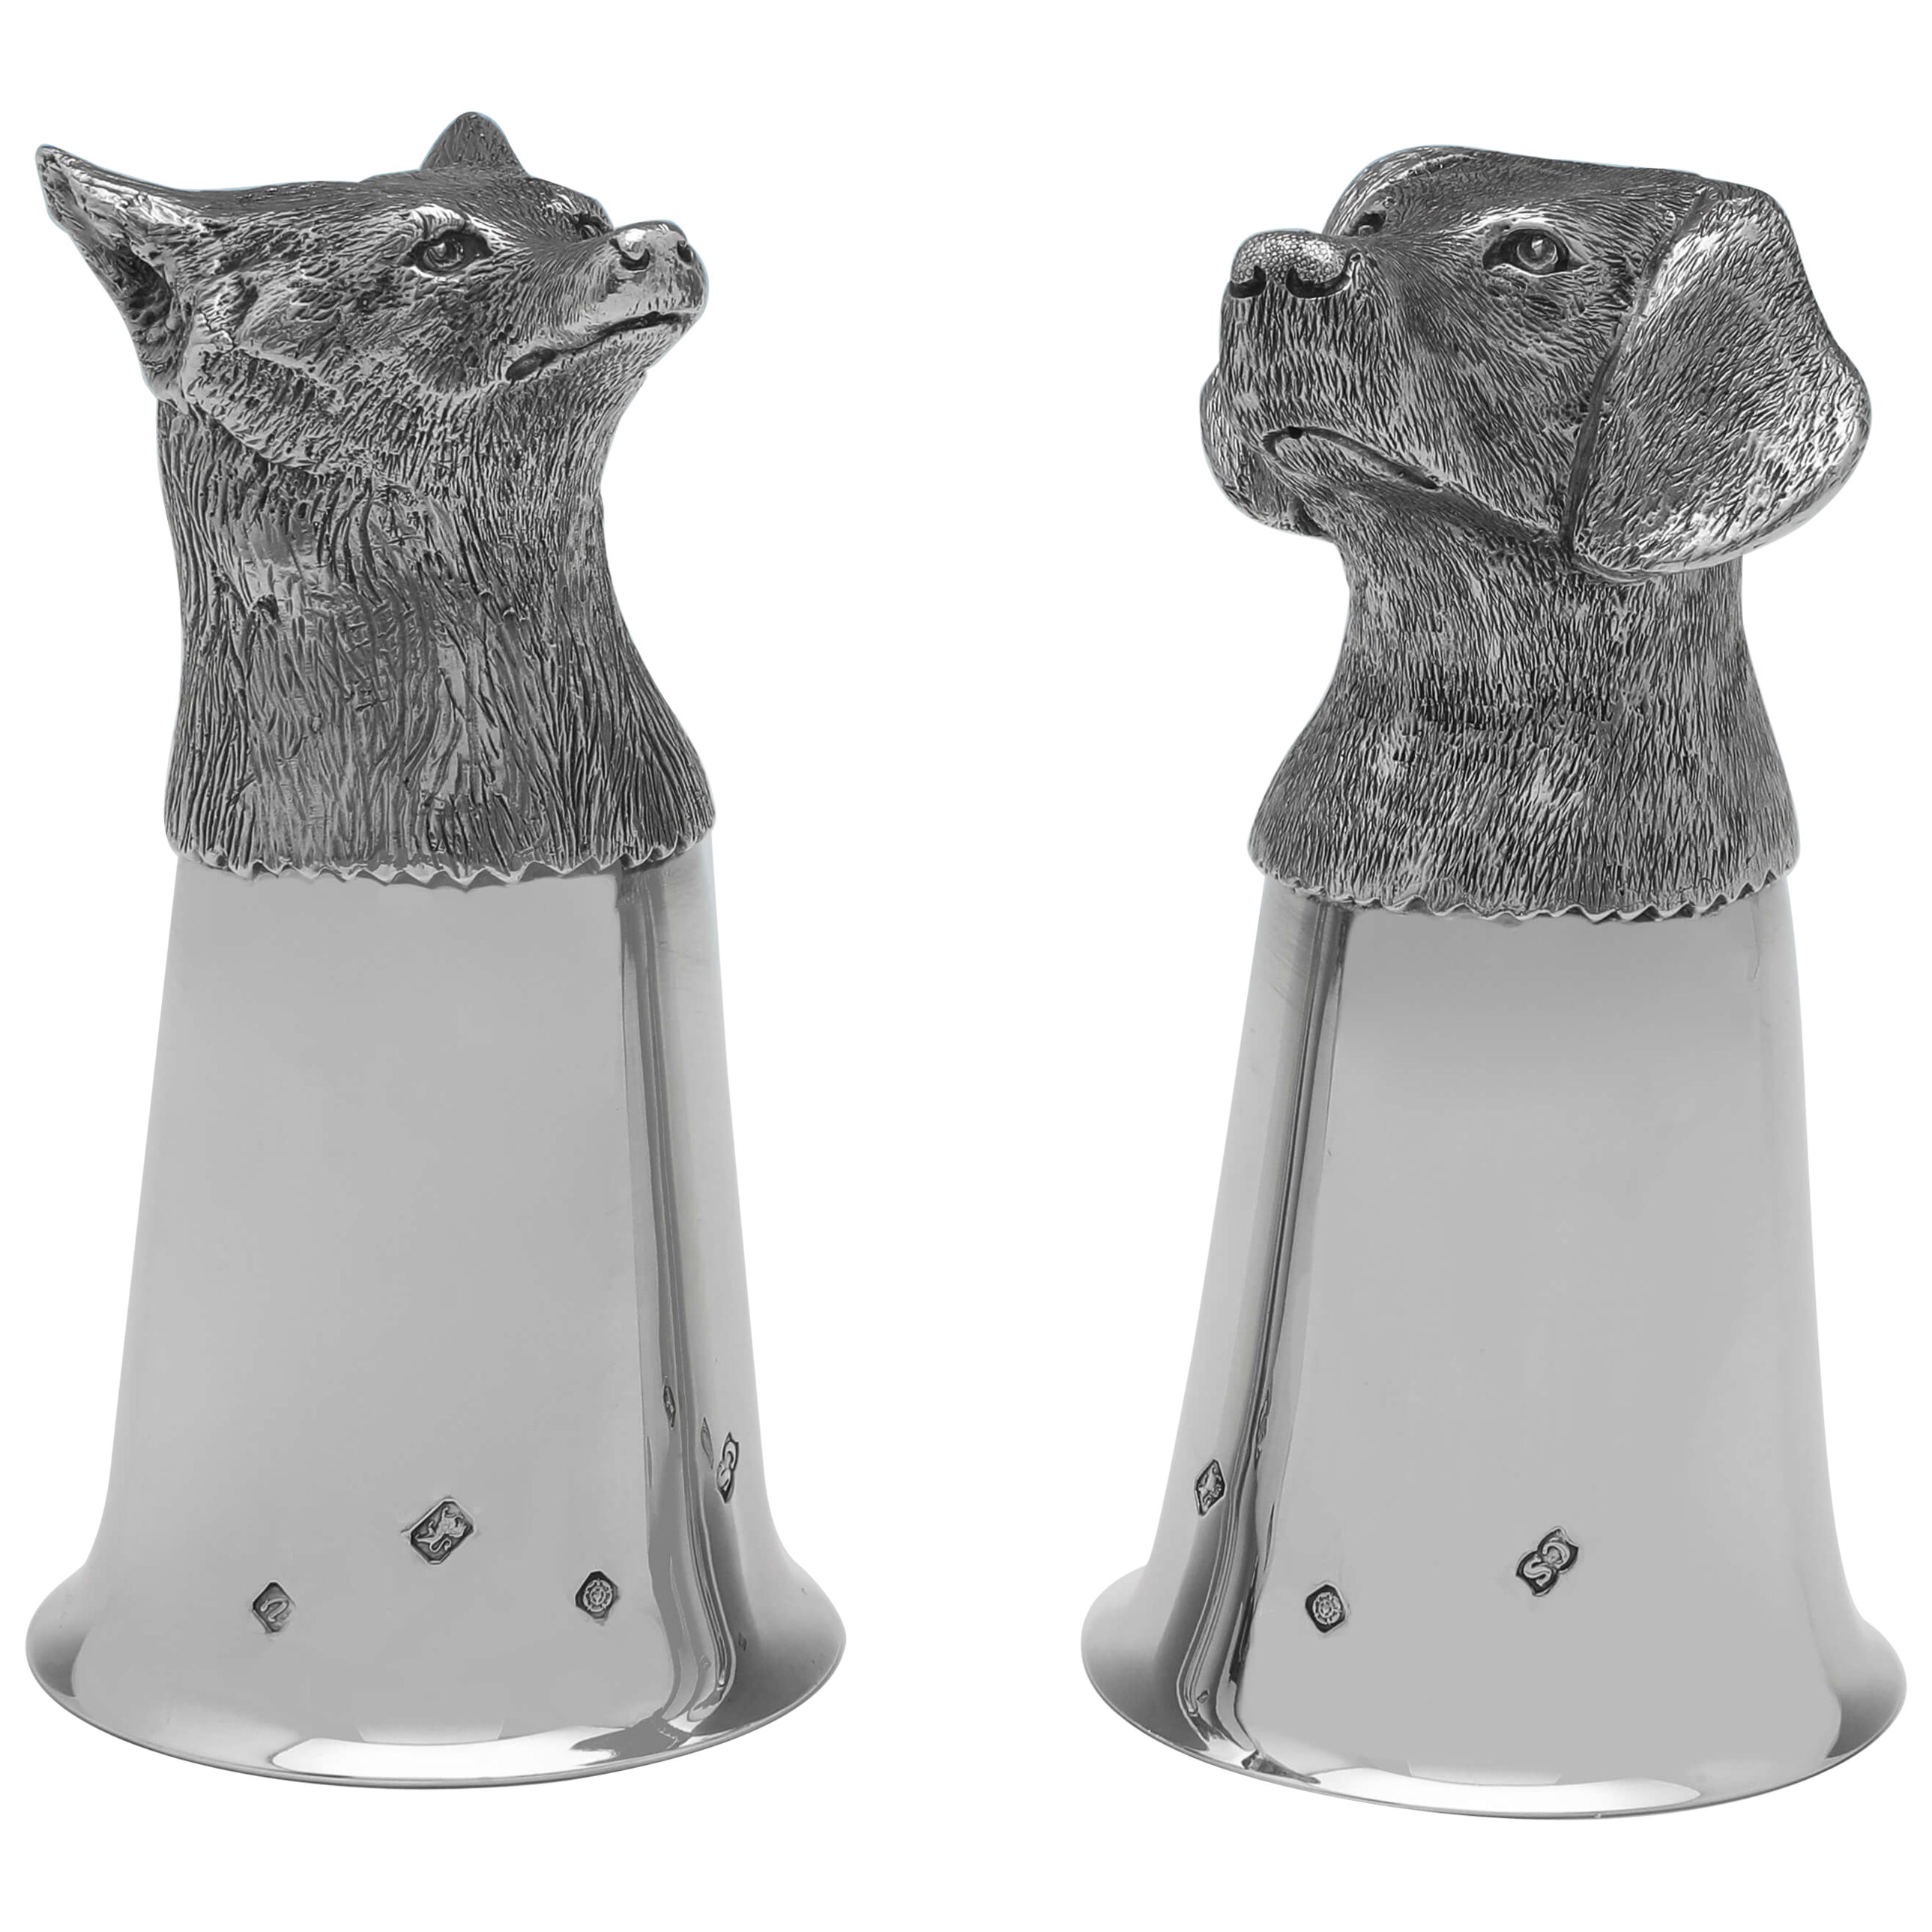 Pair of Sterling Silver Stirrup Cups - Fox & Dog Head - Camelot Silverware 1995